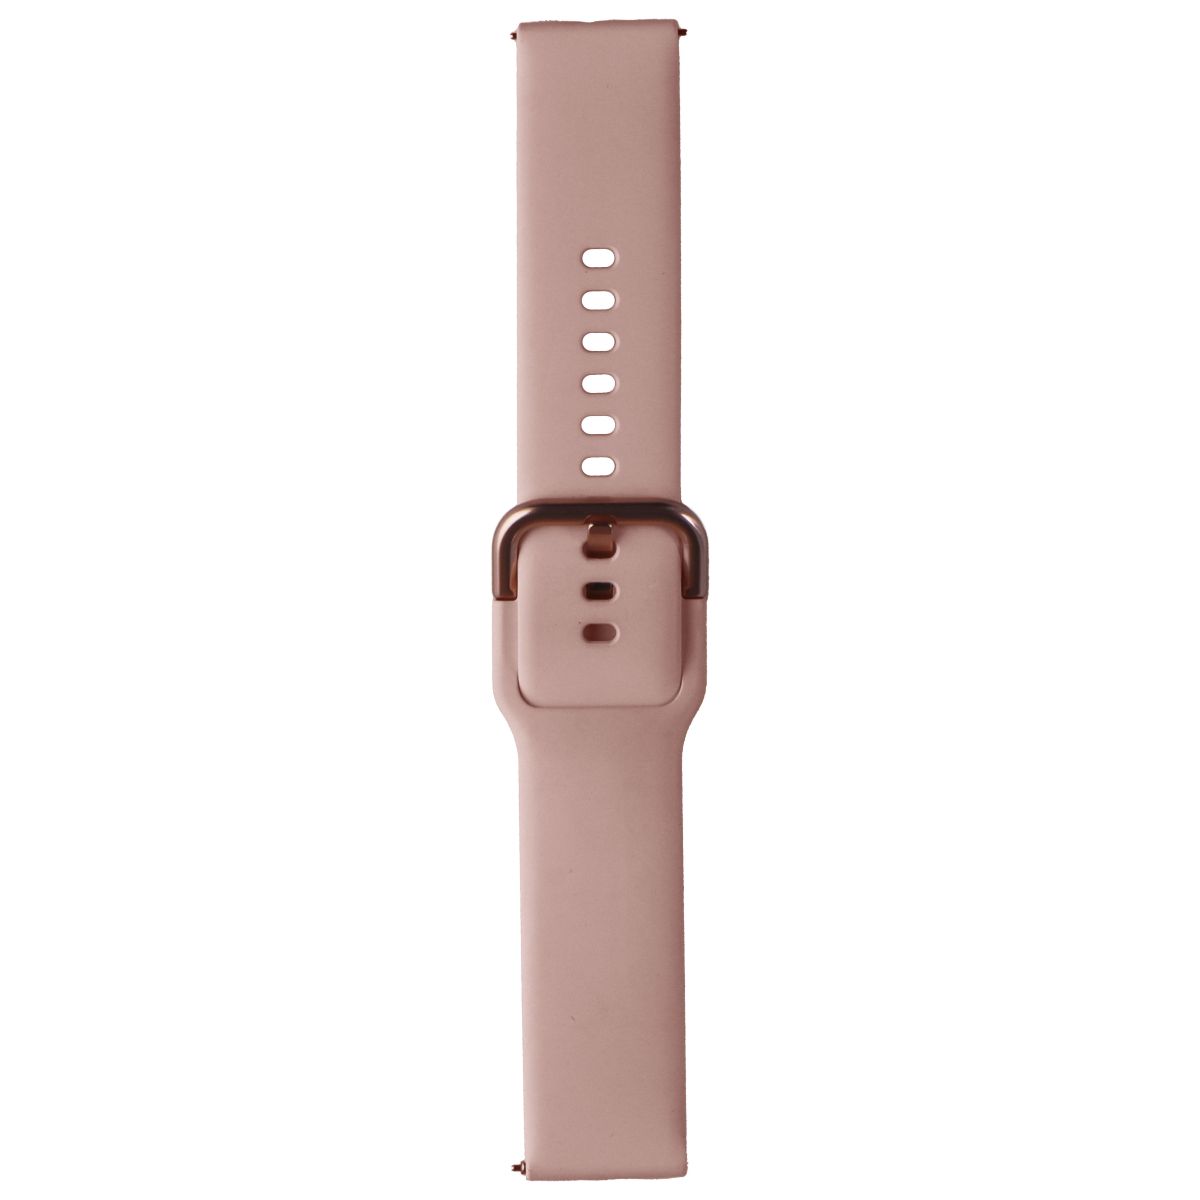 Samsung Fluoroelastomer Band (20mm) for Galaxy Watch Active/Active 2 - Pink Smart Watch Accessories - Watch Bands Samsung    - Simple Cell Bulk Wholesale Pricing - USA Seller